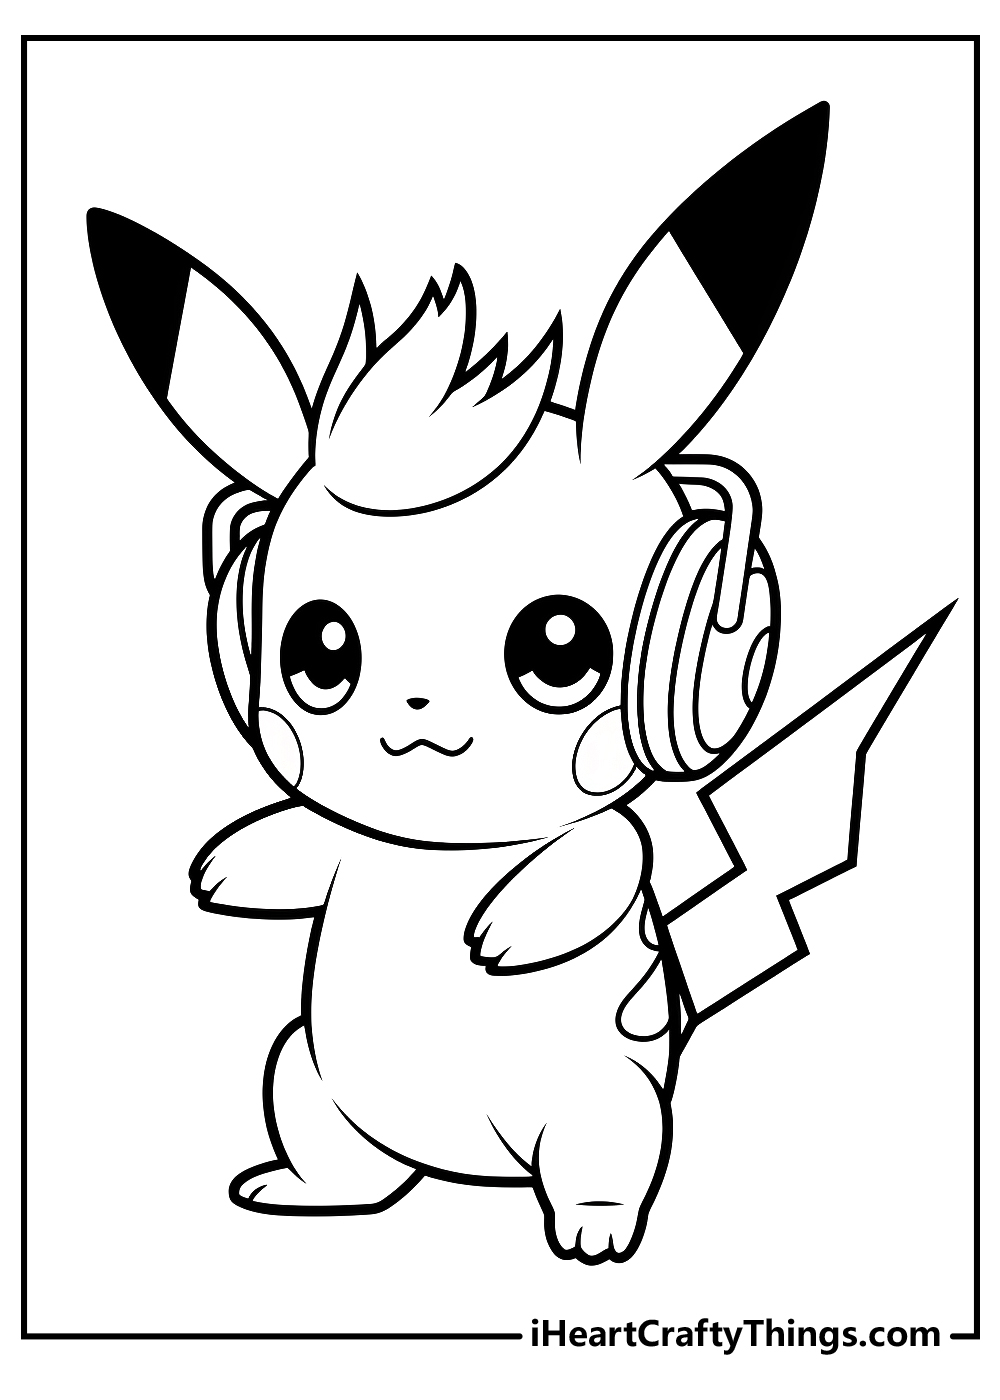 black-and-white pikachu coloring pages